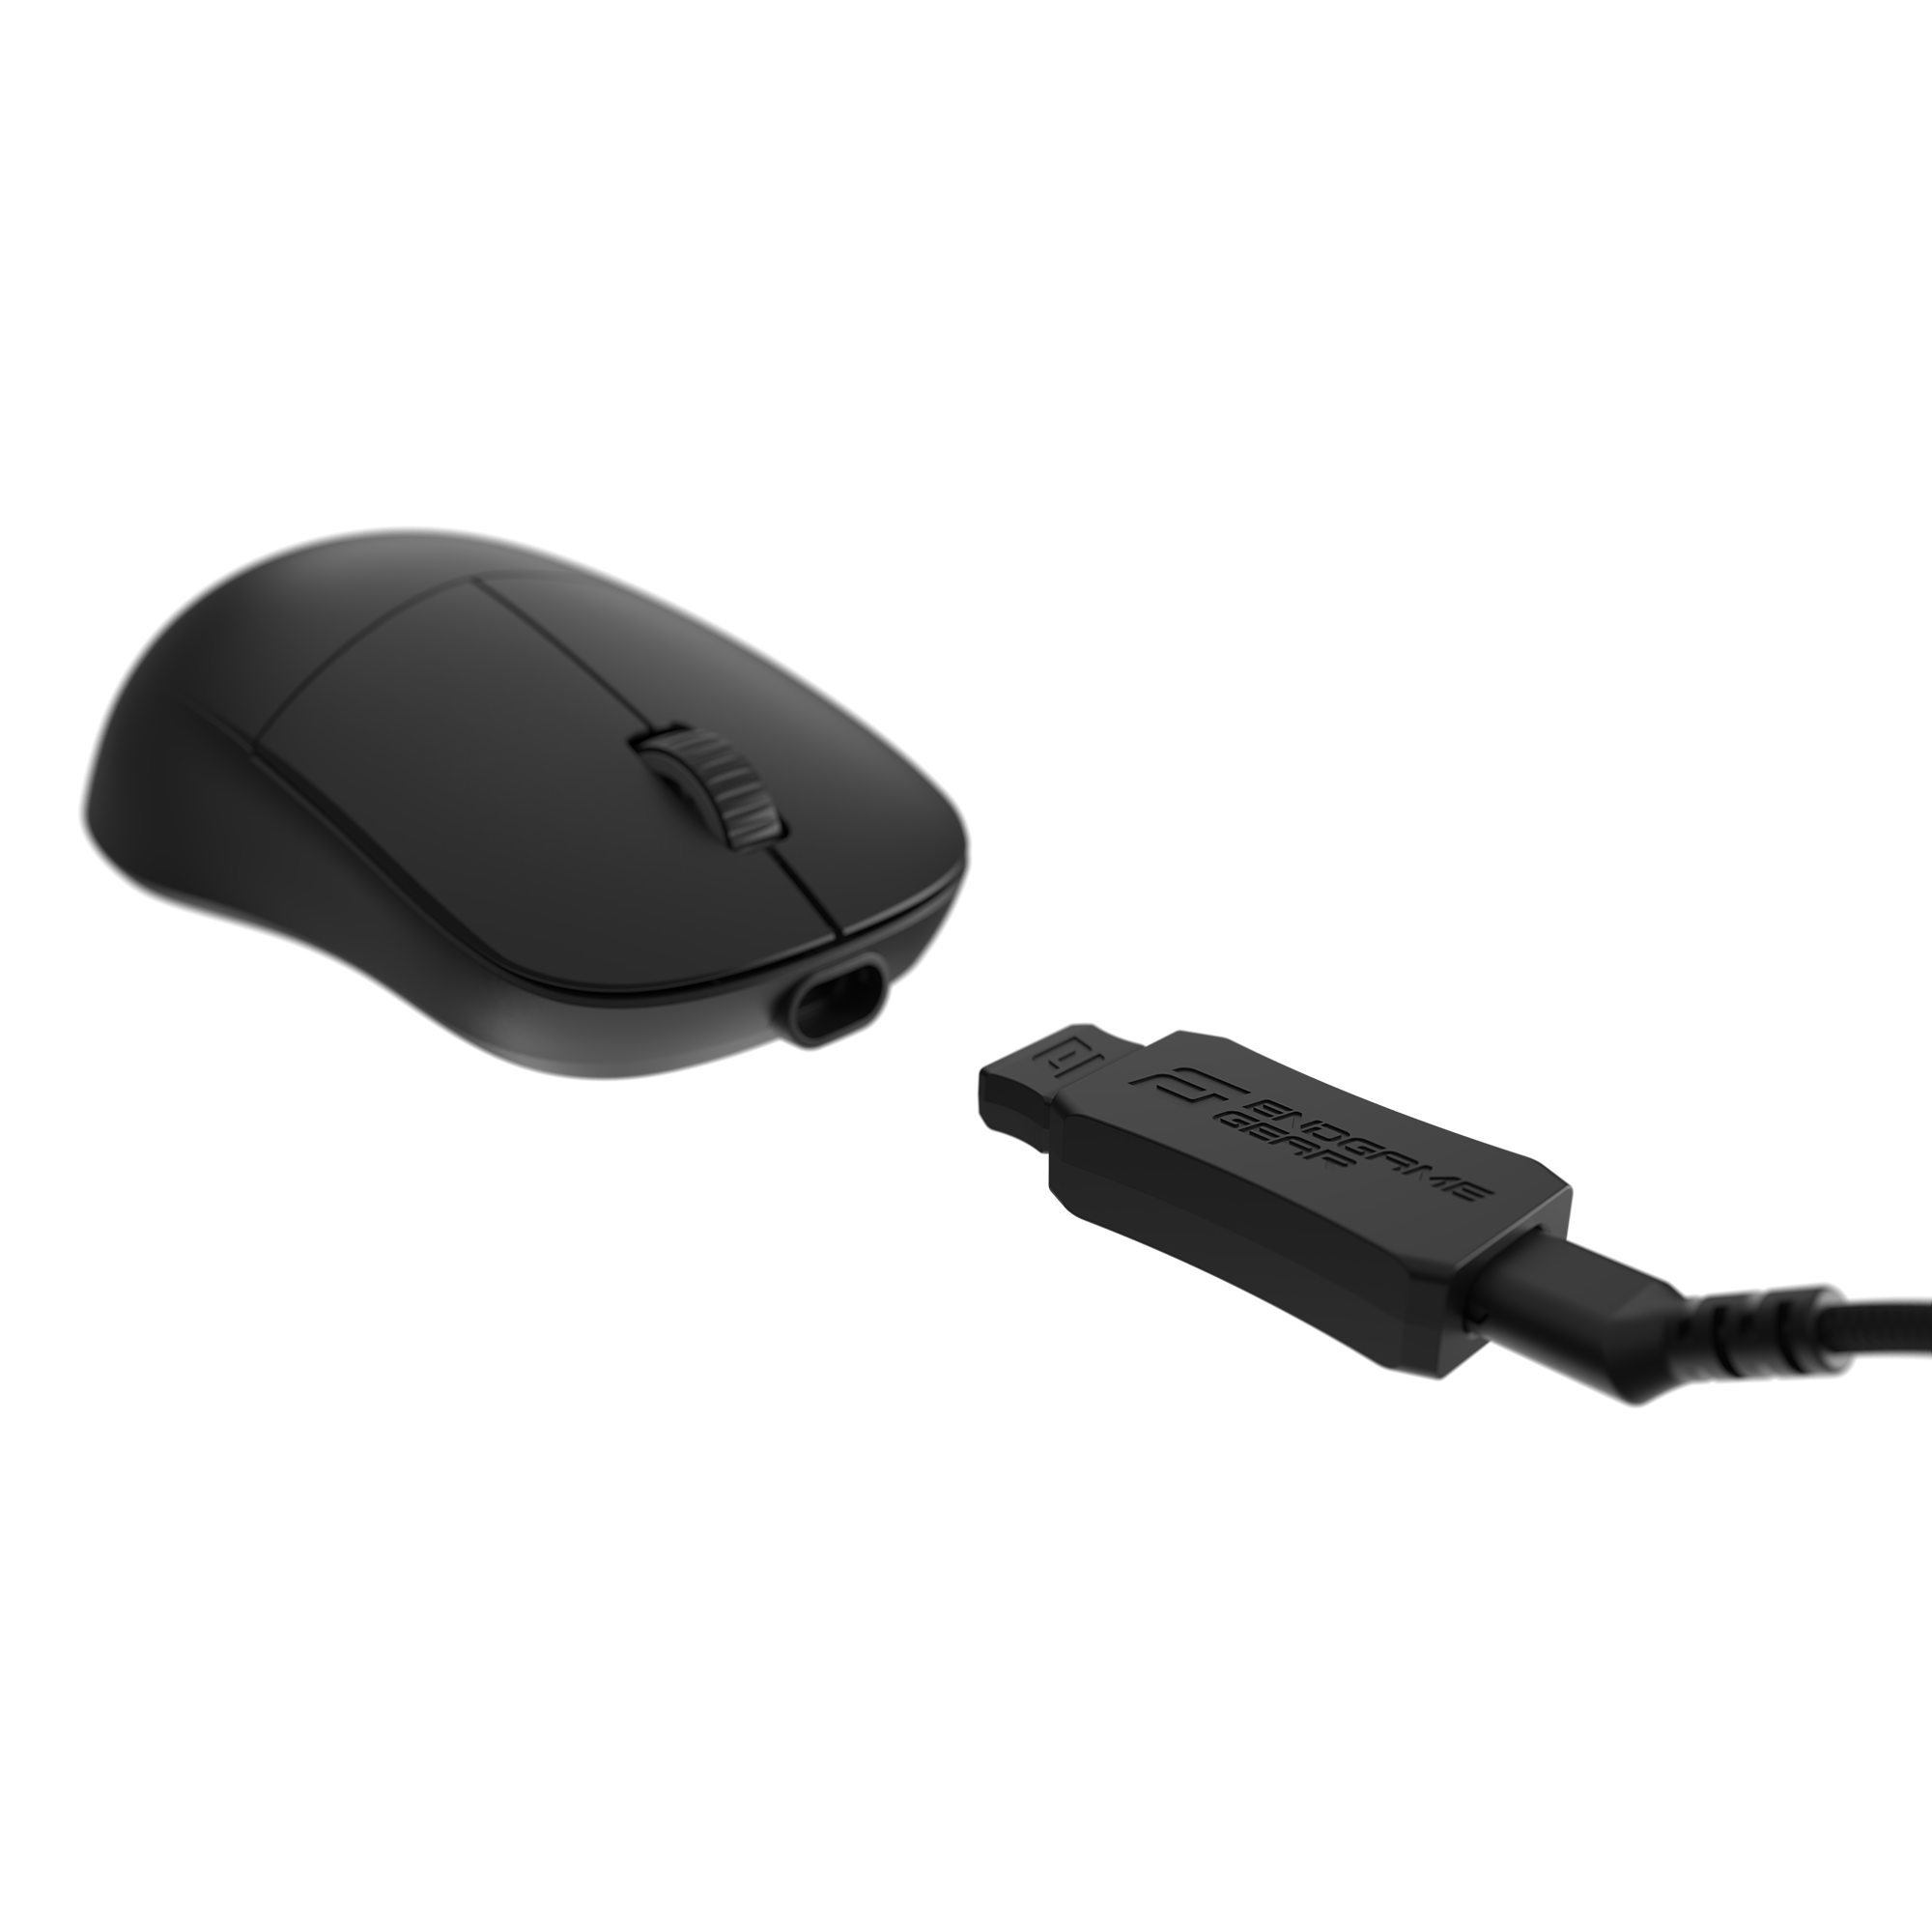 XM2we Wireless Gaming Mouse - black